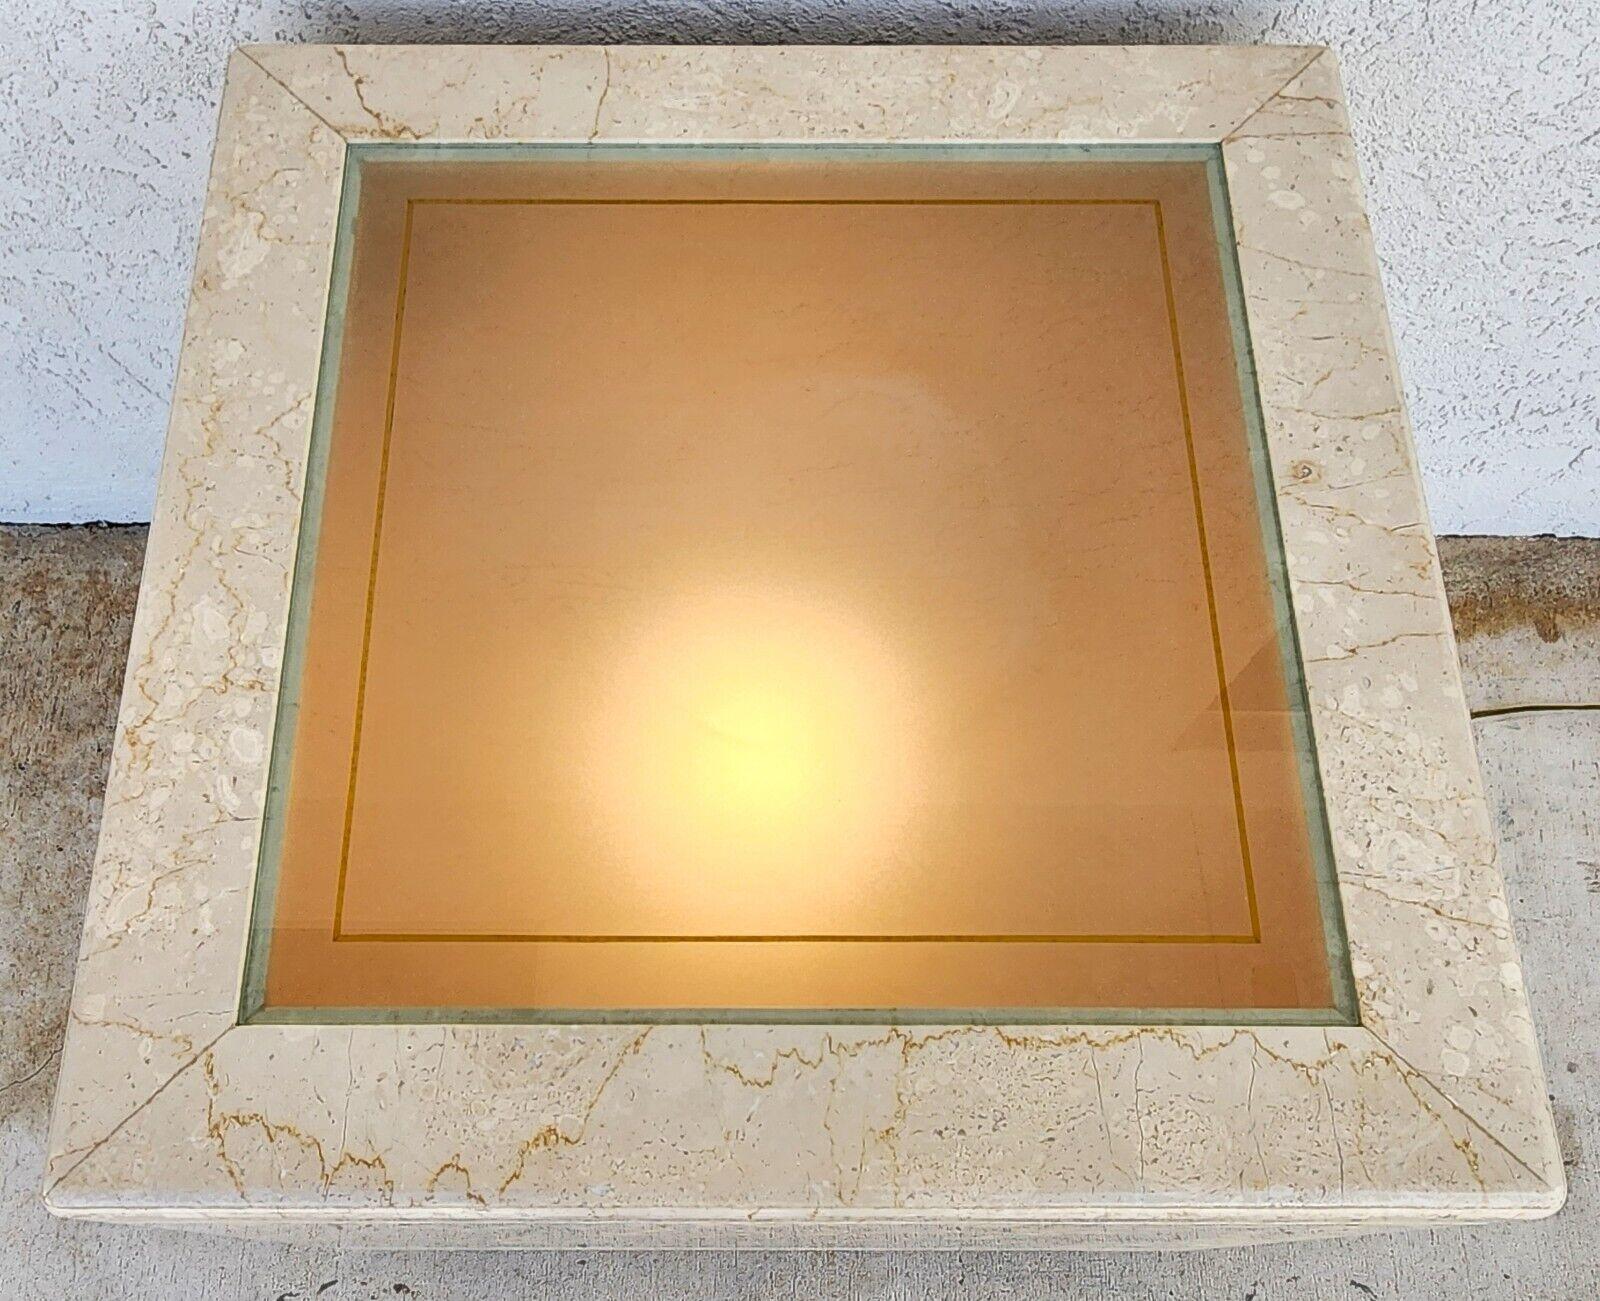 For FULL item description click on CONTINUE READING at the bottom of this page.

Offering One Of Our Recent Palm Beach Estate Fine Furniture Acquisitions Of A 
Side Center Table Marble Vintage Lighted Custom Made
Lights from inside with push